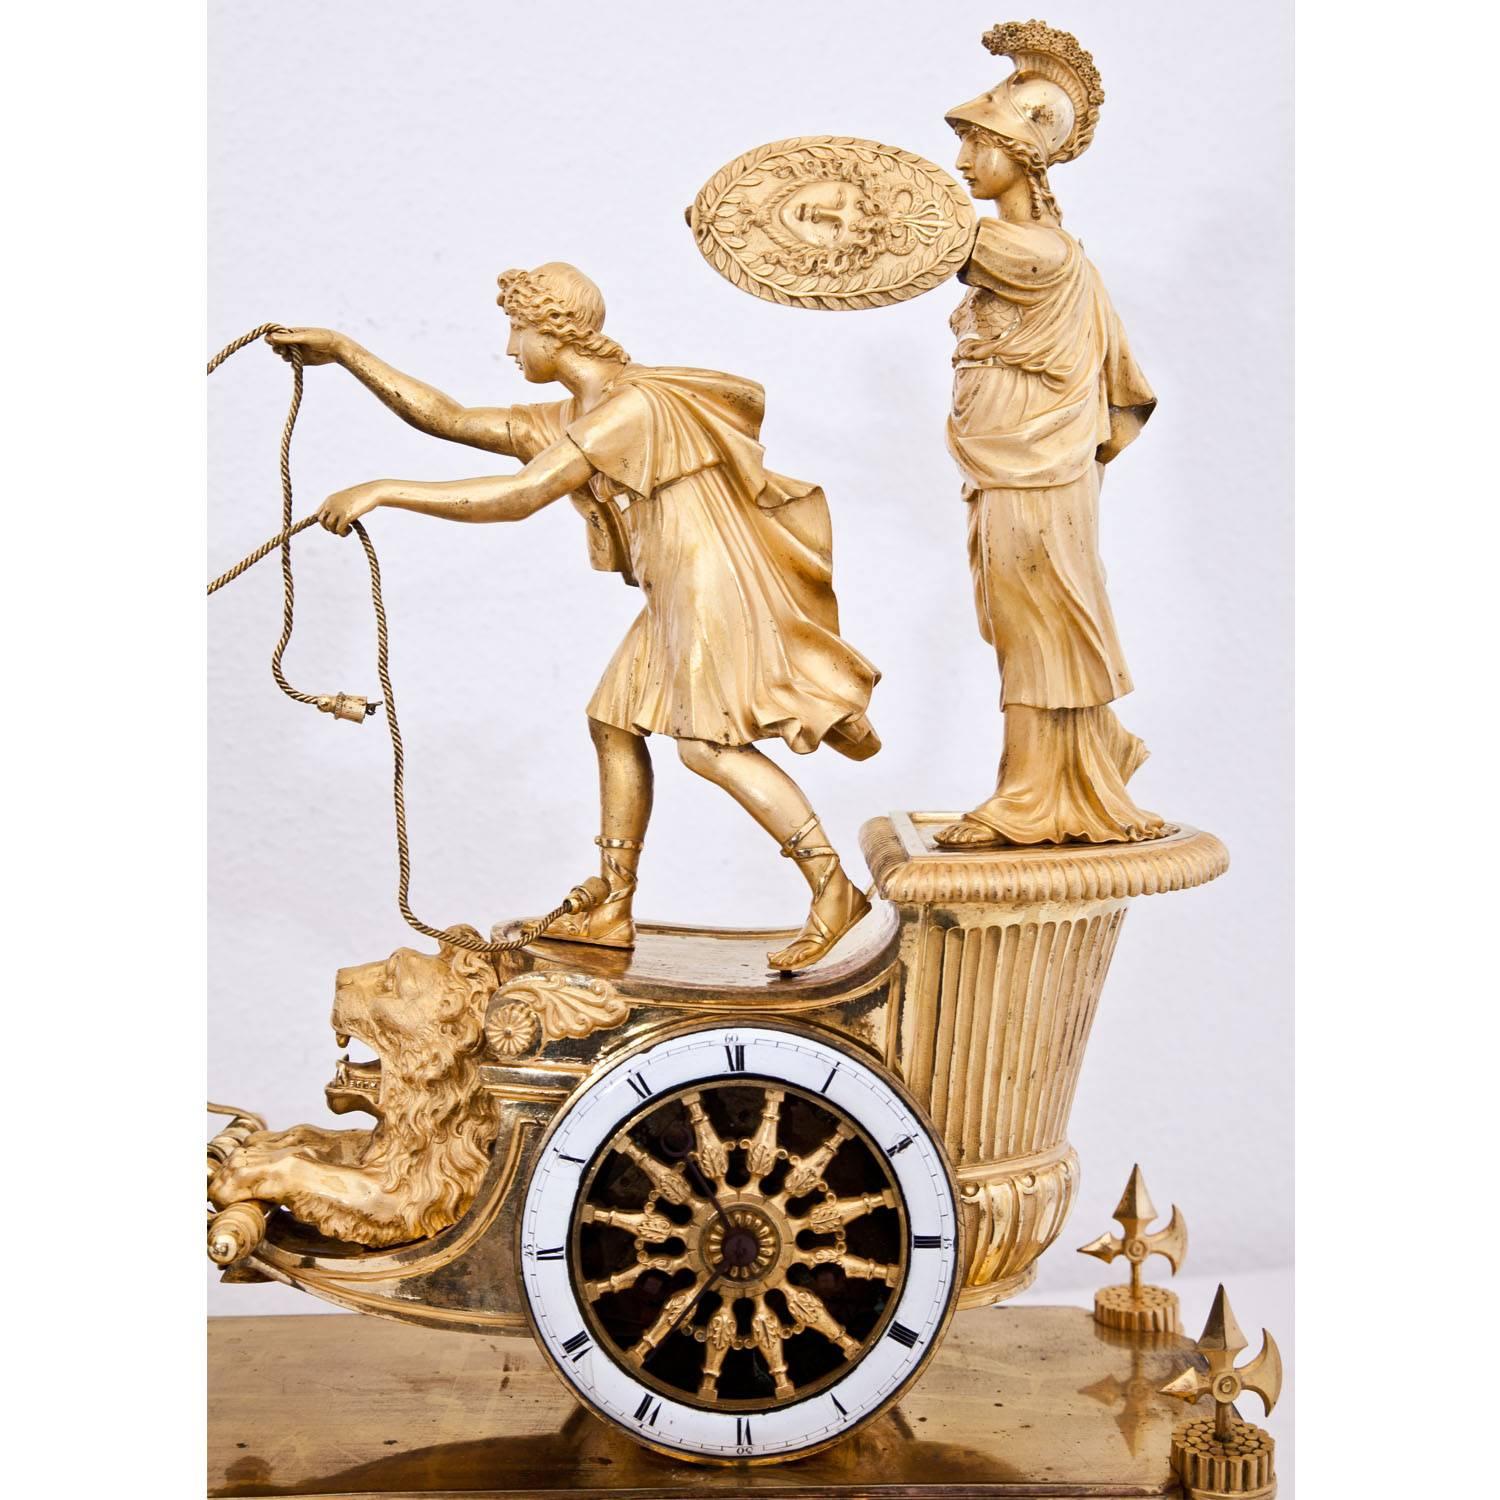 Empire Mantle Clock with Chariot of Telemachus, Paris, Early 19th Century